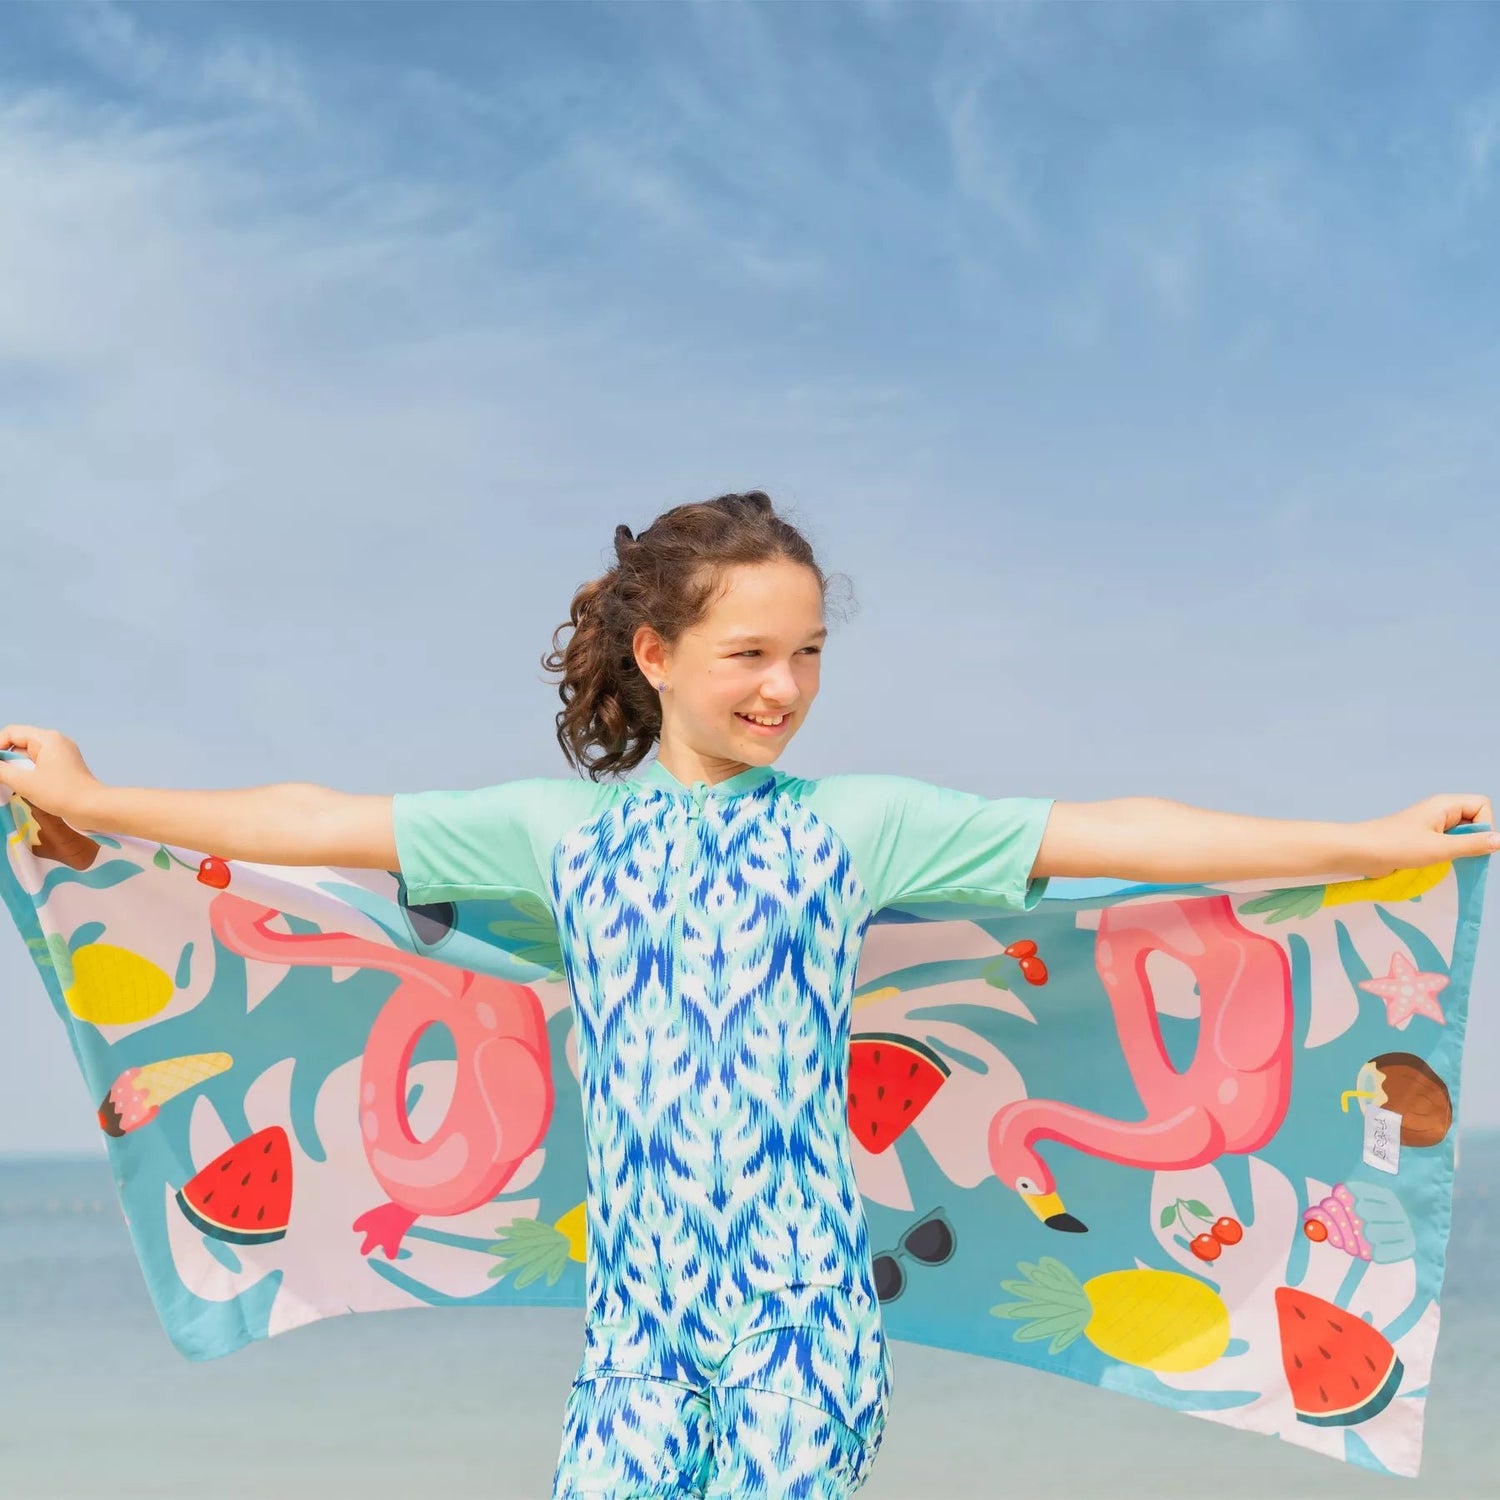 A girl holding a kids Quick Dry, Sand Free, Light Weight, Compact and Ecofriendly Microfiber Beach Towel from La Toalla